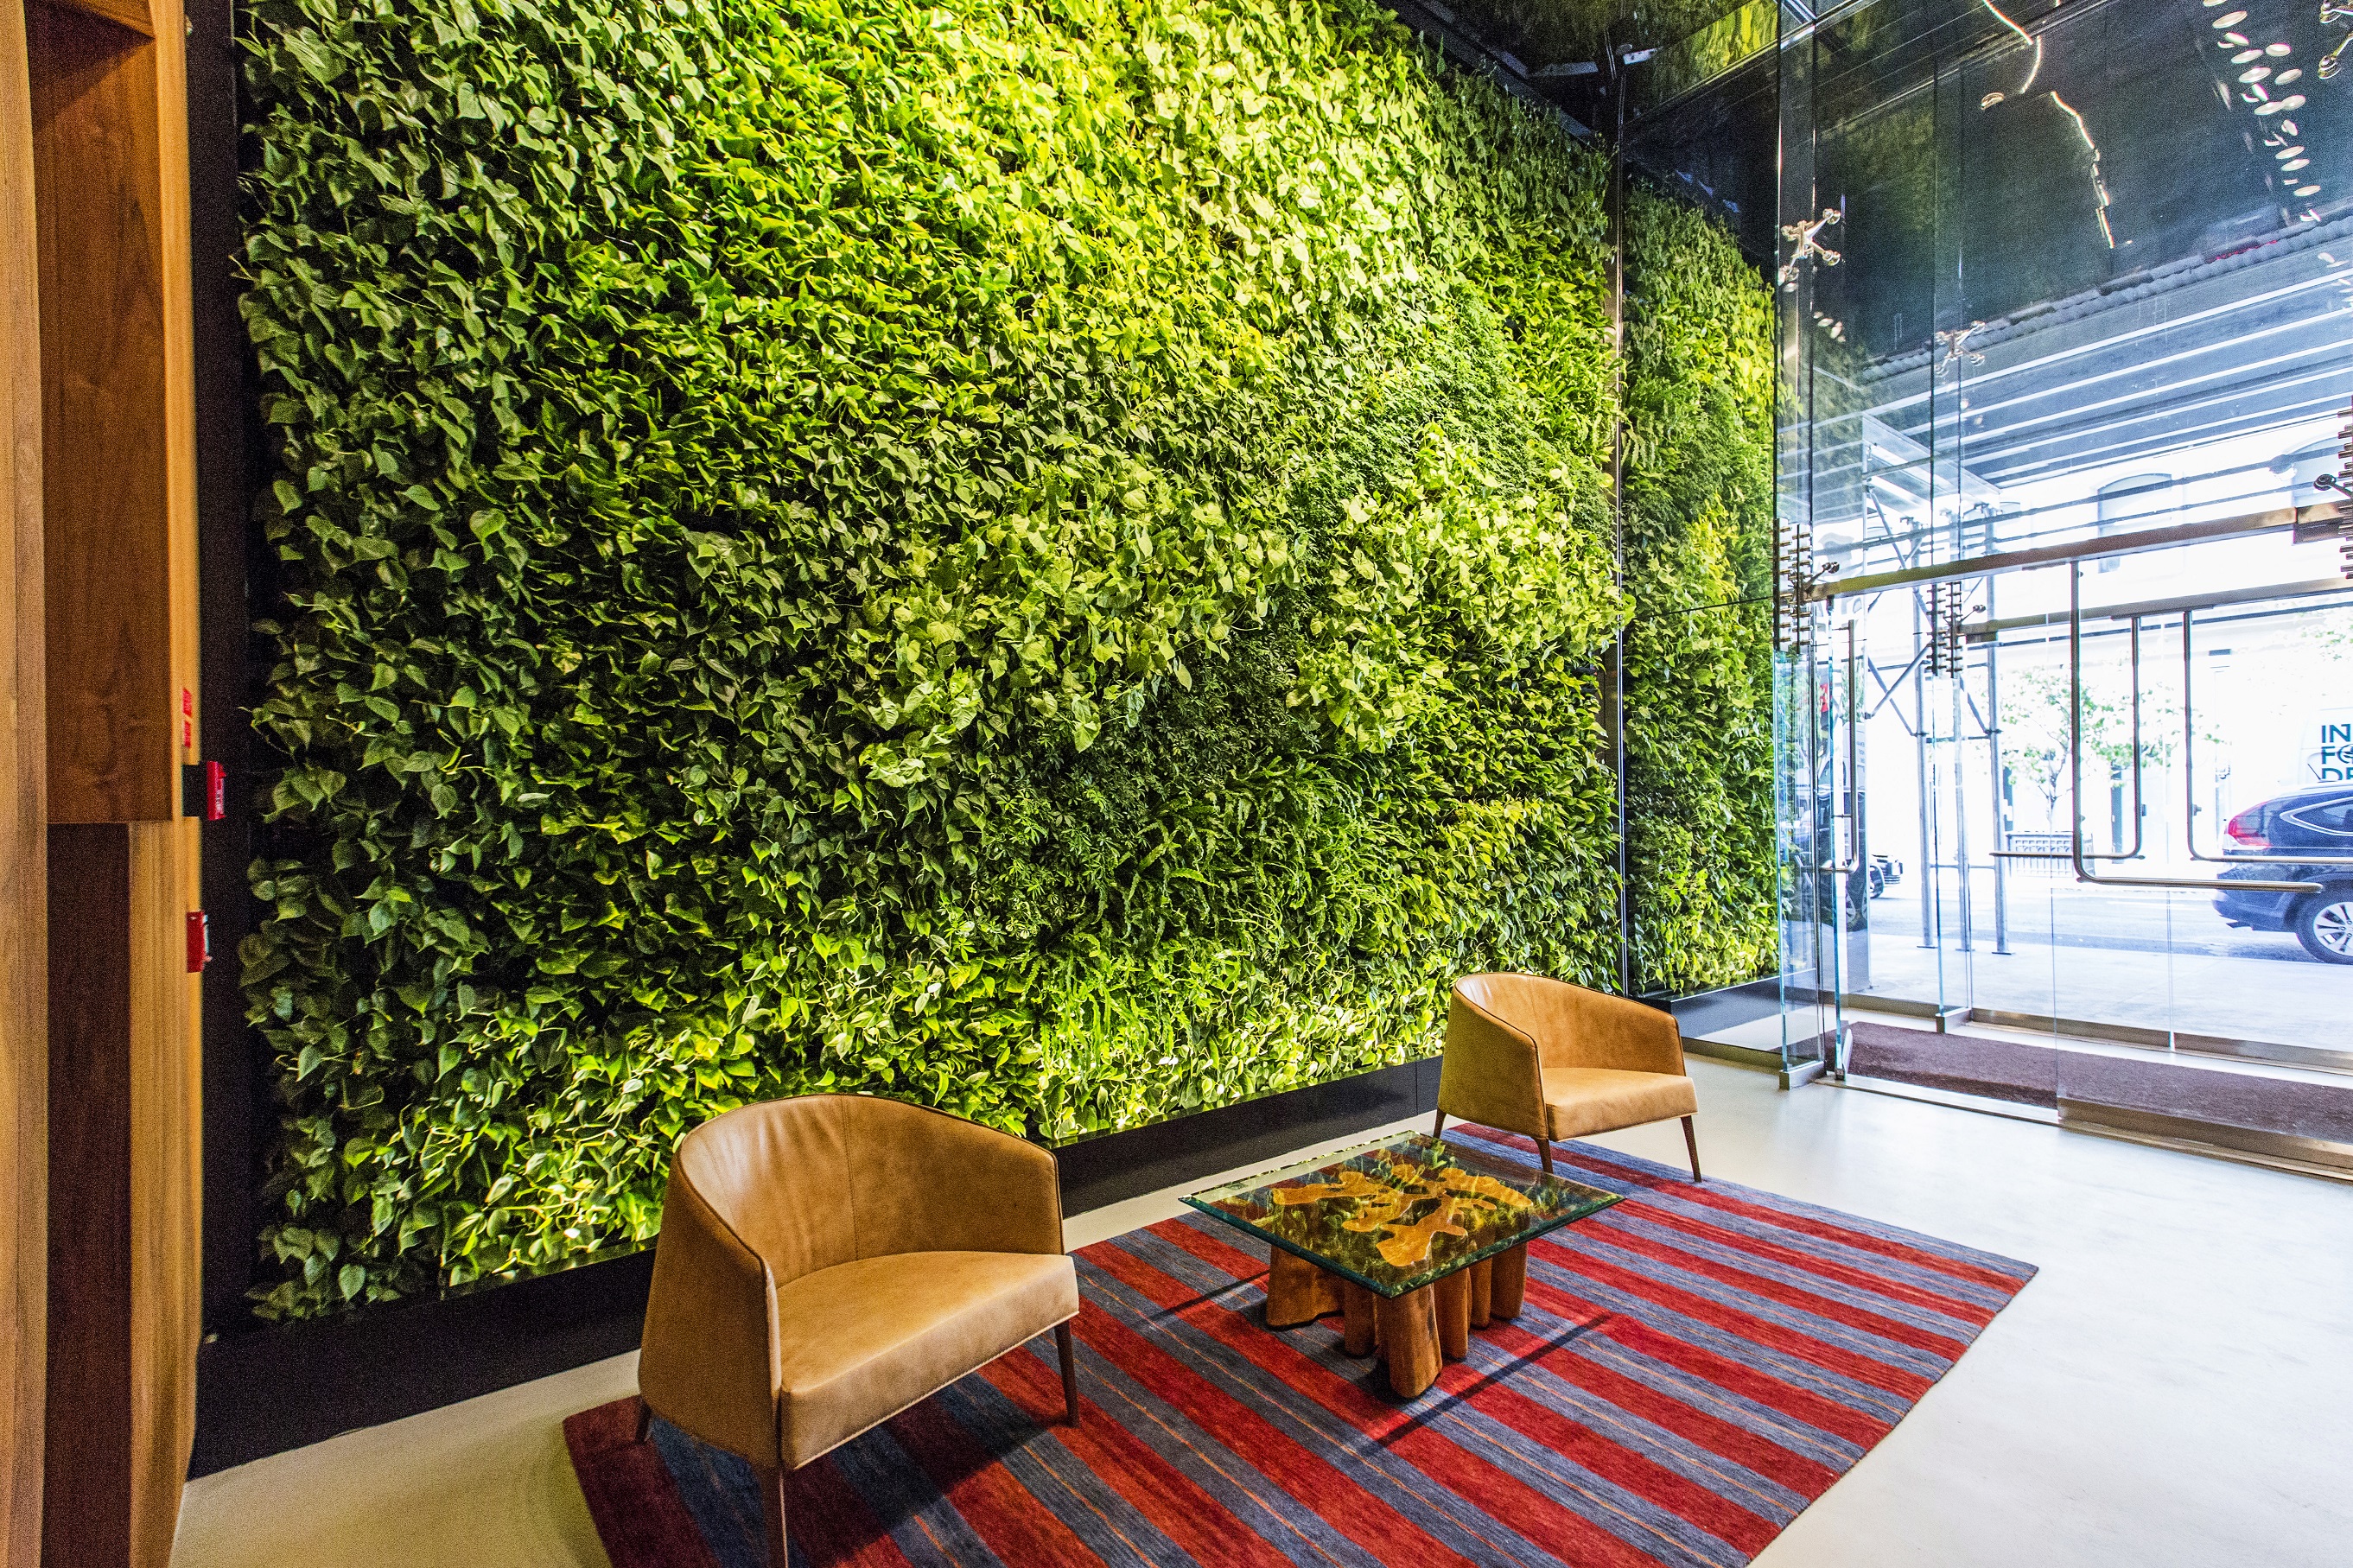 Top 3 Trends in Office Landscaping for 2019